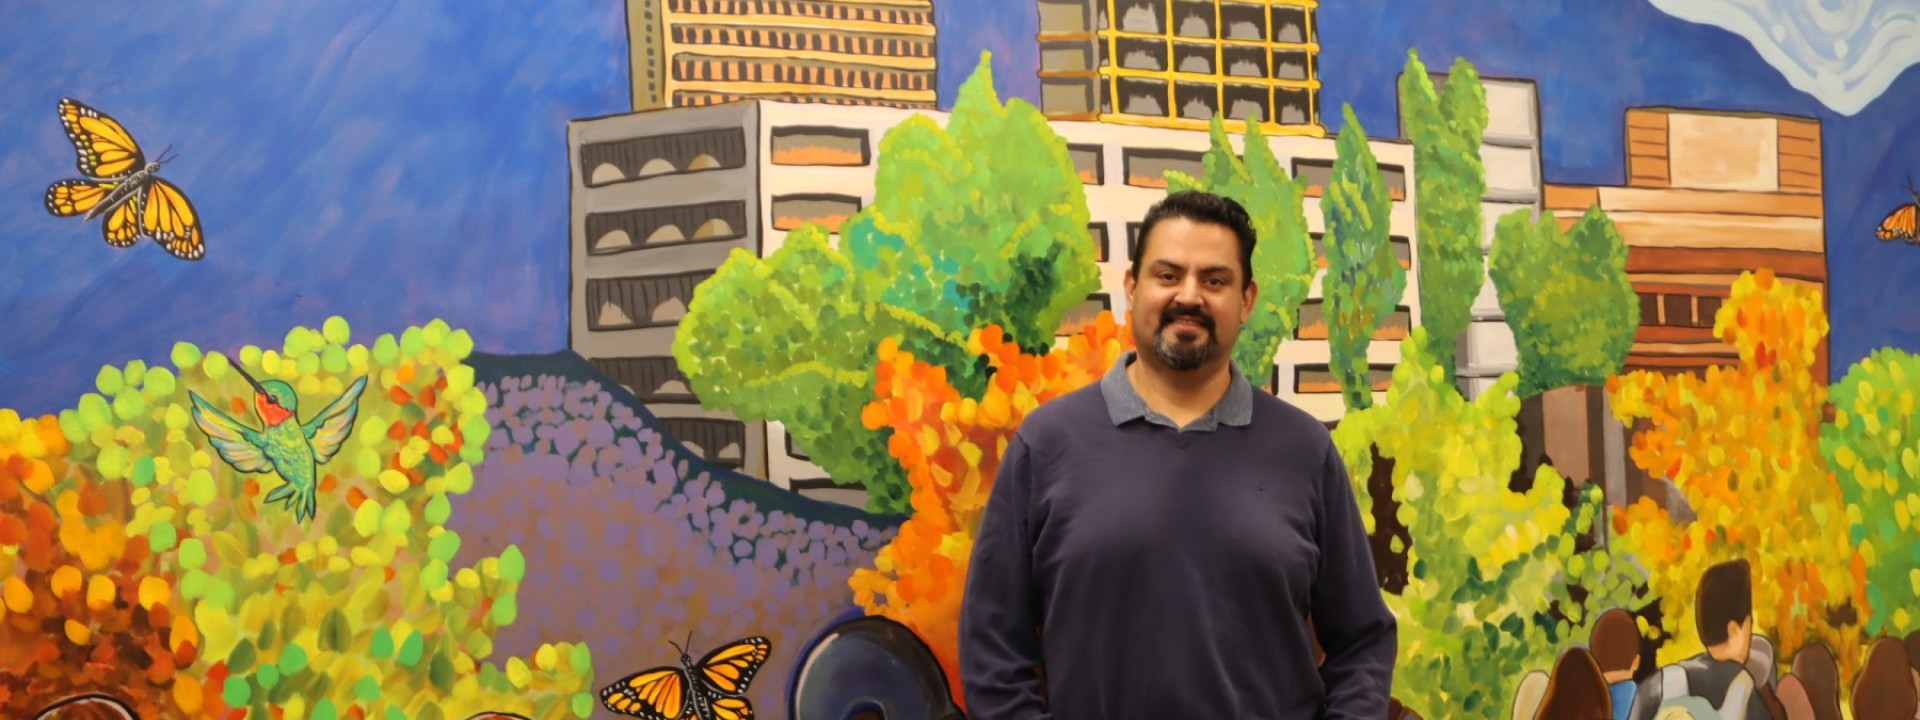 MA Student, Reynaldo Mora posing in front of a mural he painted 